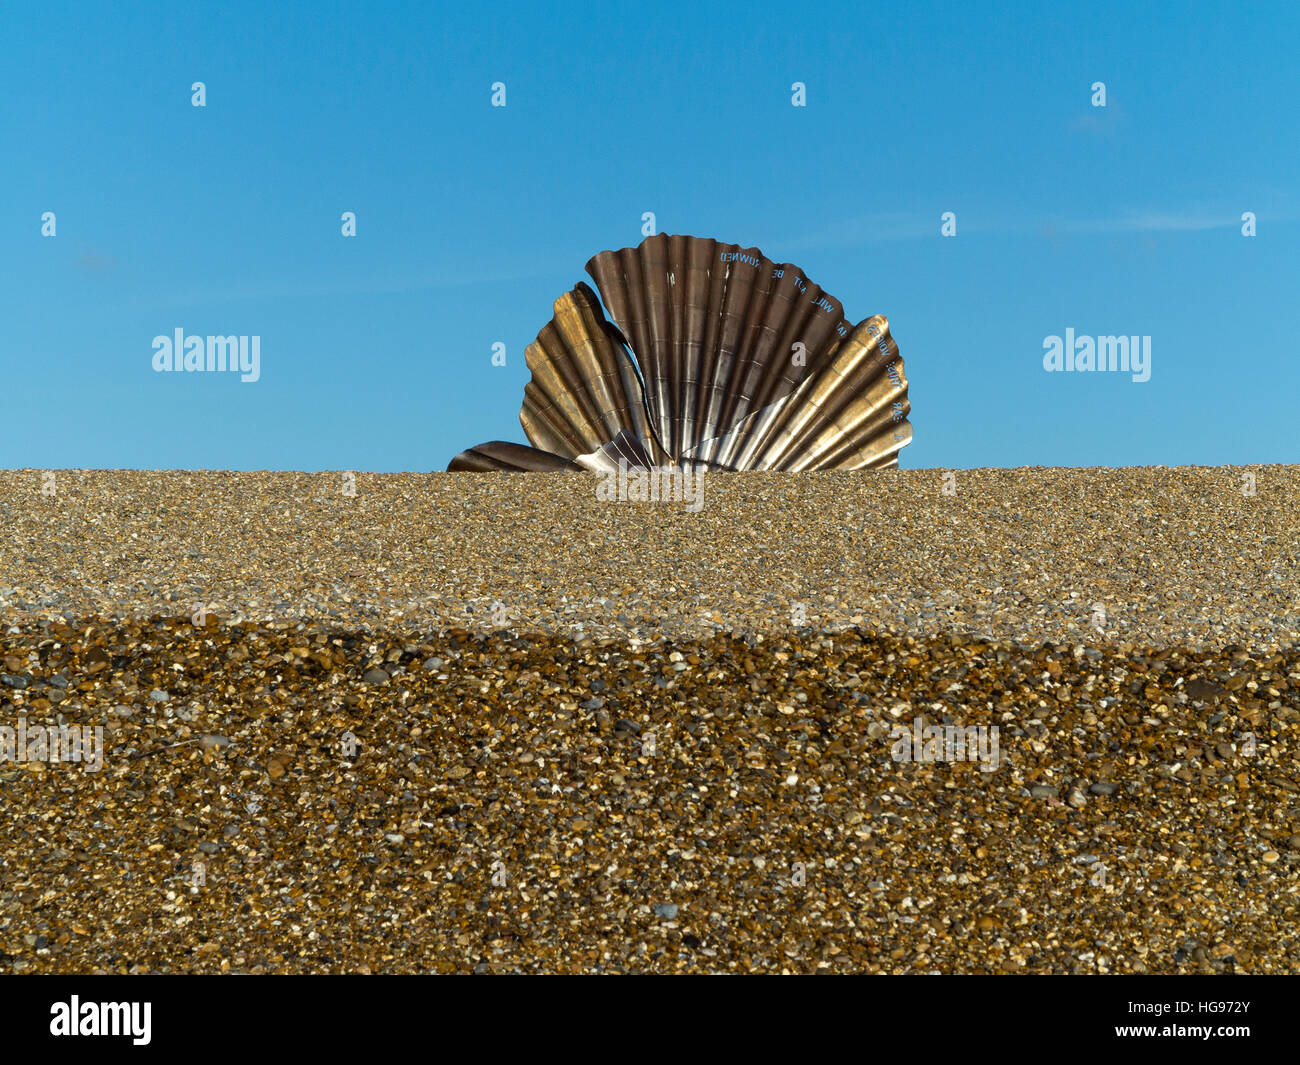 'The Scallop' stainless steel sculpture by Maggi Hambling on the shingle beach at Aldeburgh Suffolk England against a blue sky Stock Photo